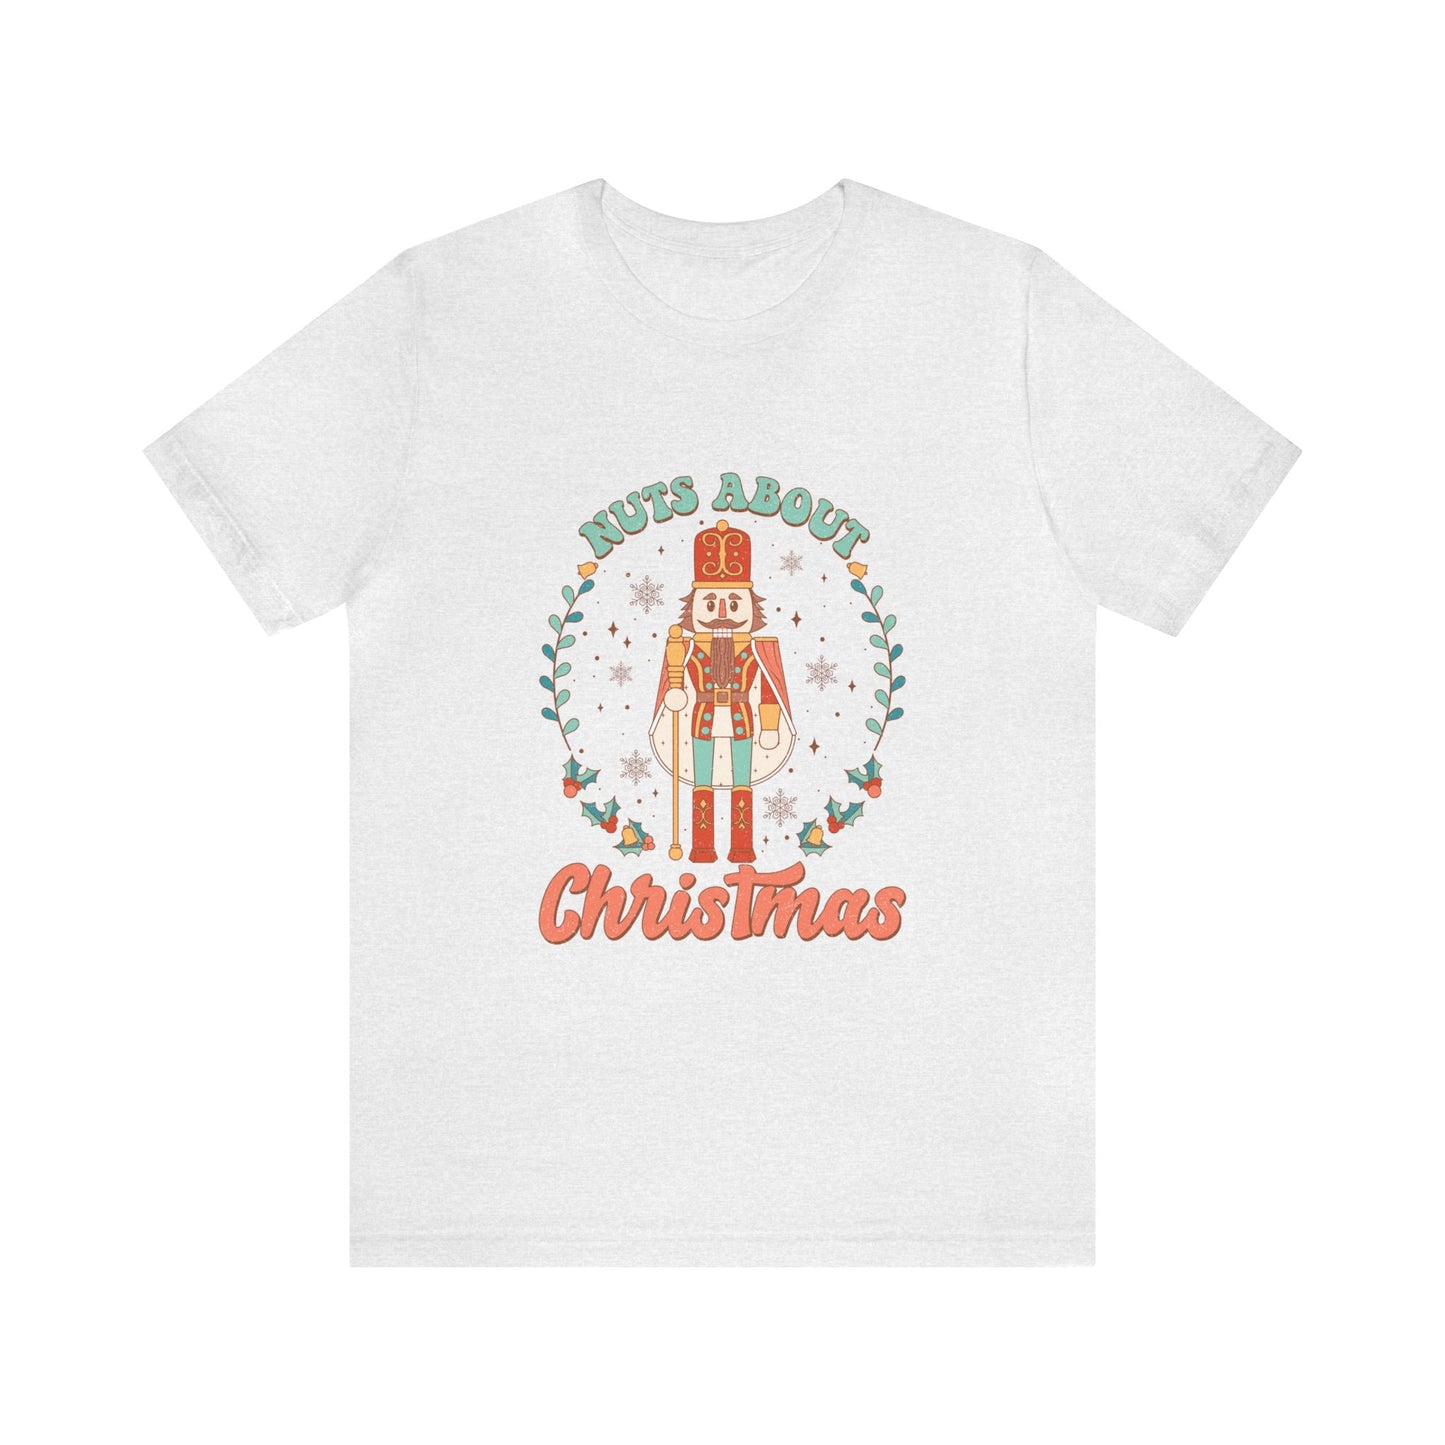 Nuts About Christmas Women's Short Sleeve Christmas T Shirt